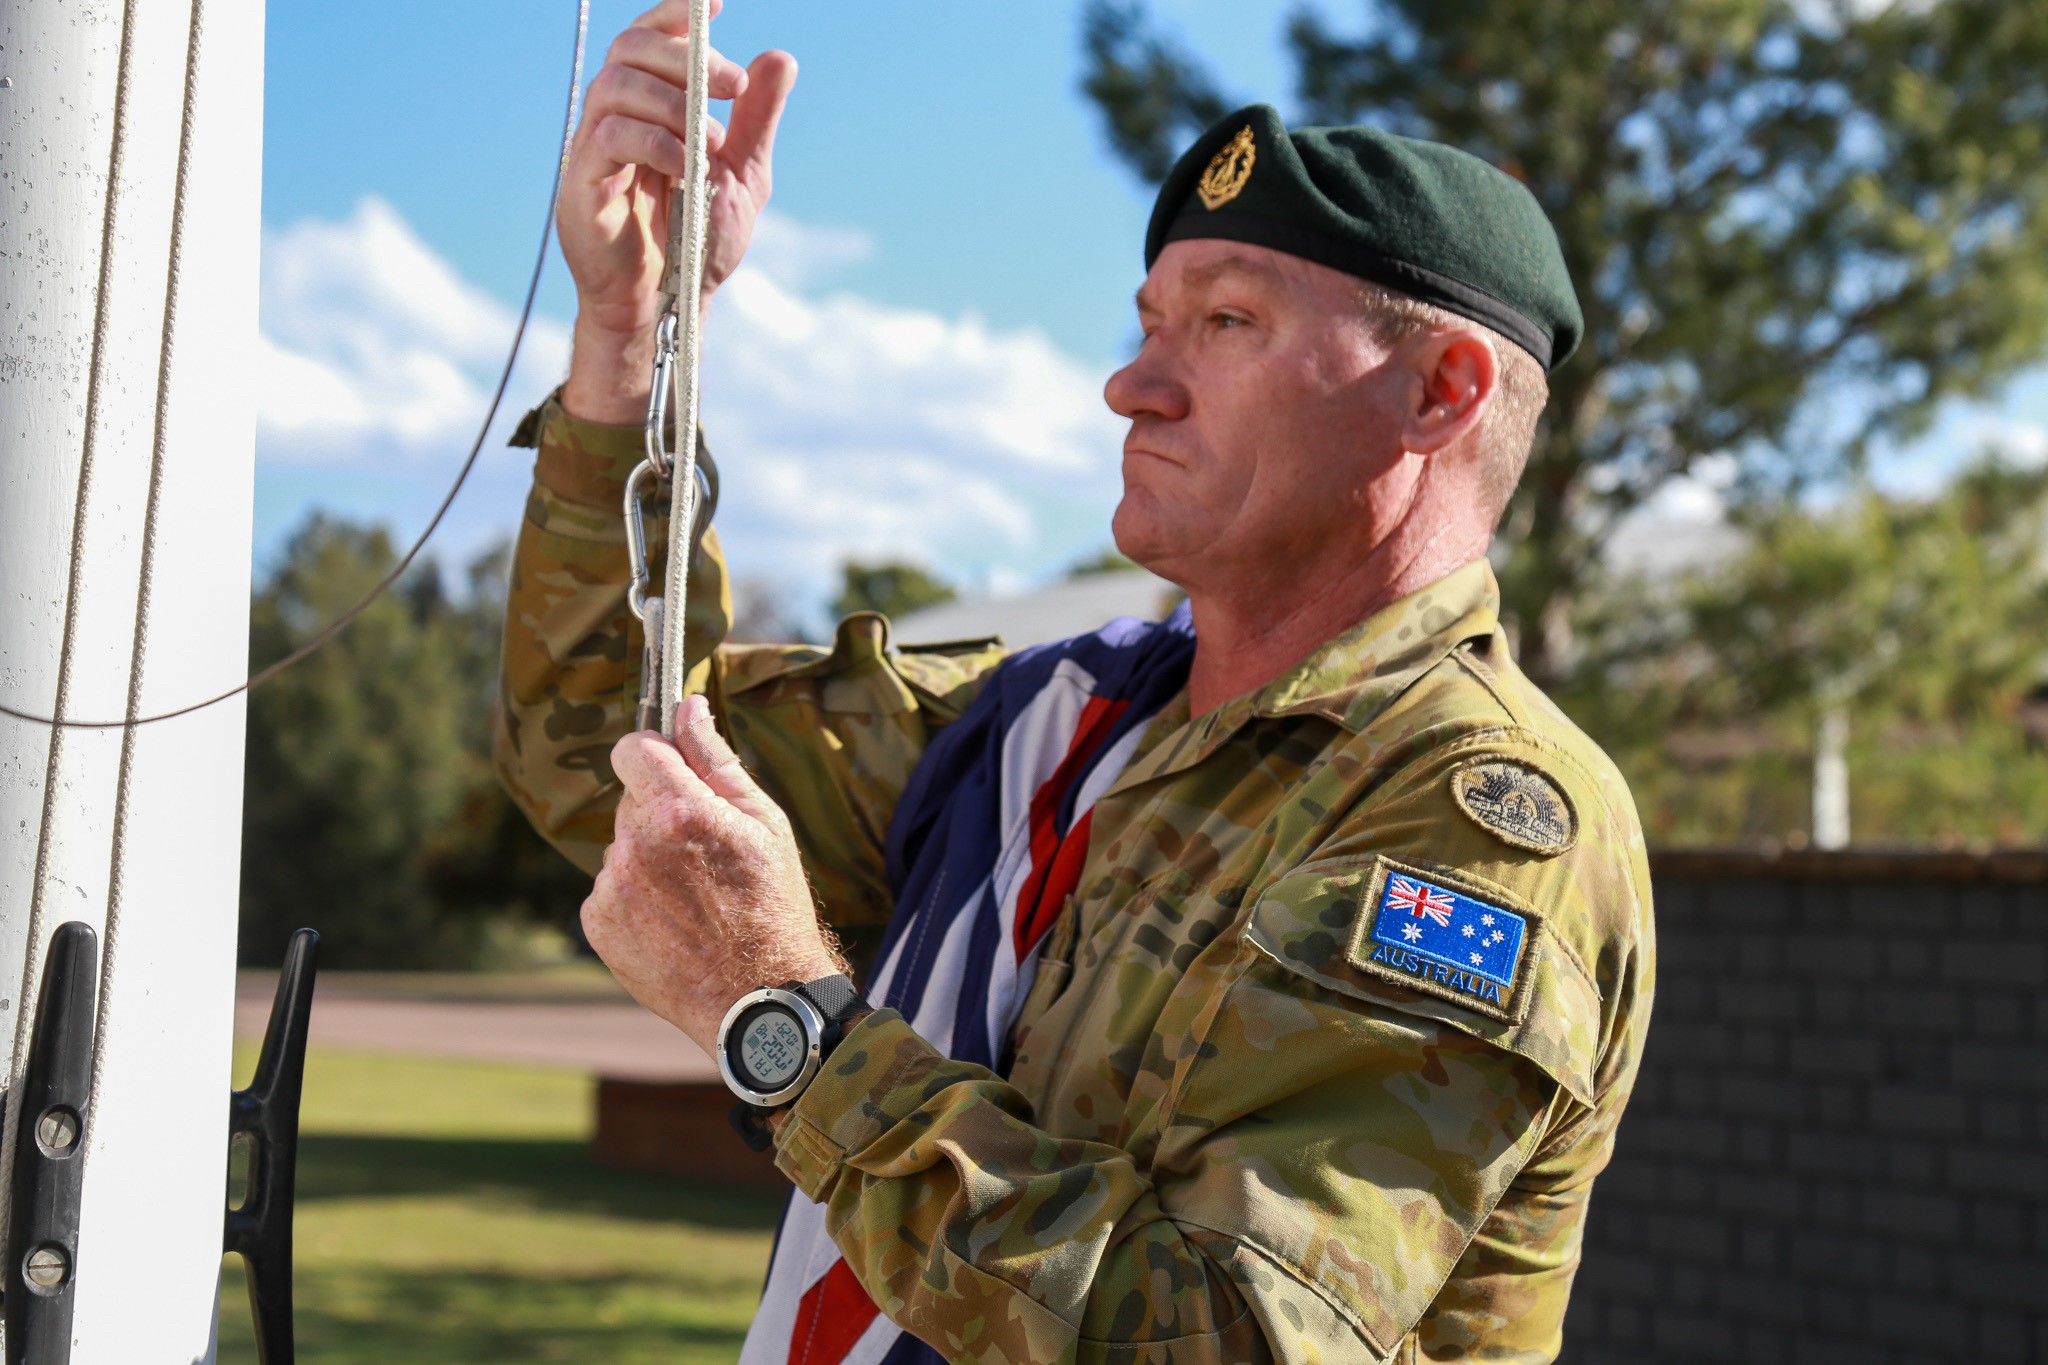 John Stonebridge – an Amazing Army Career for an ‘Average Soldier’